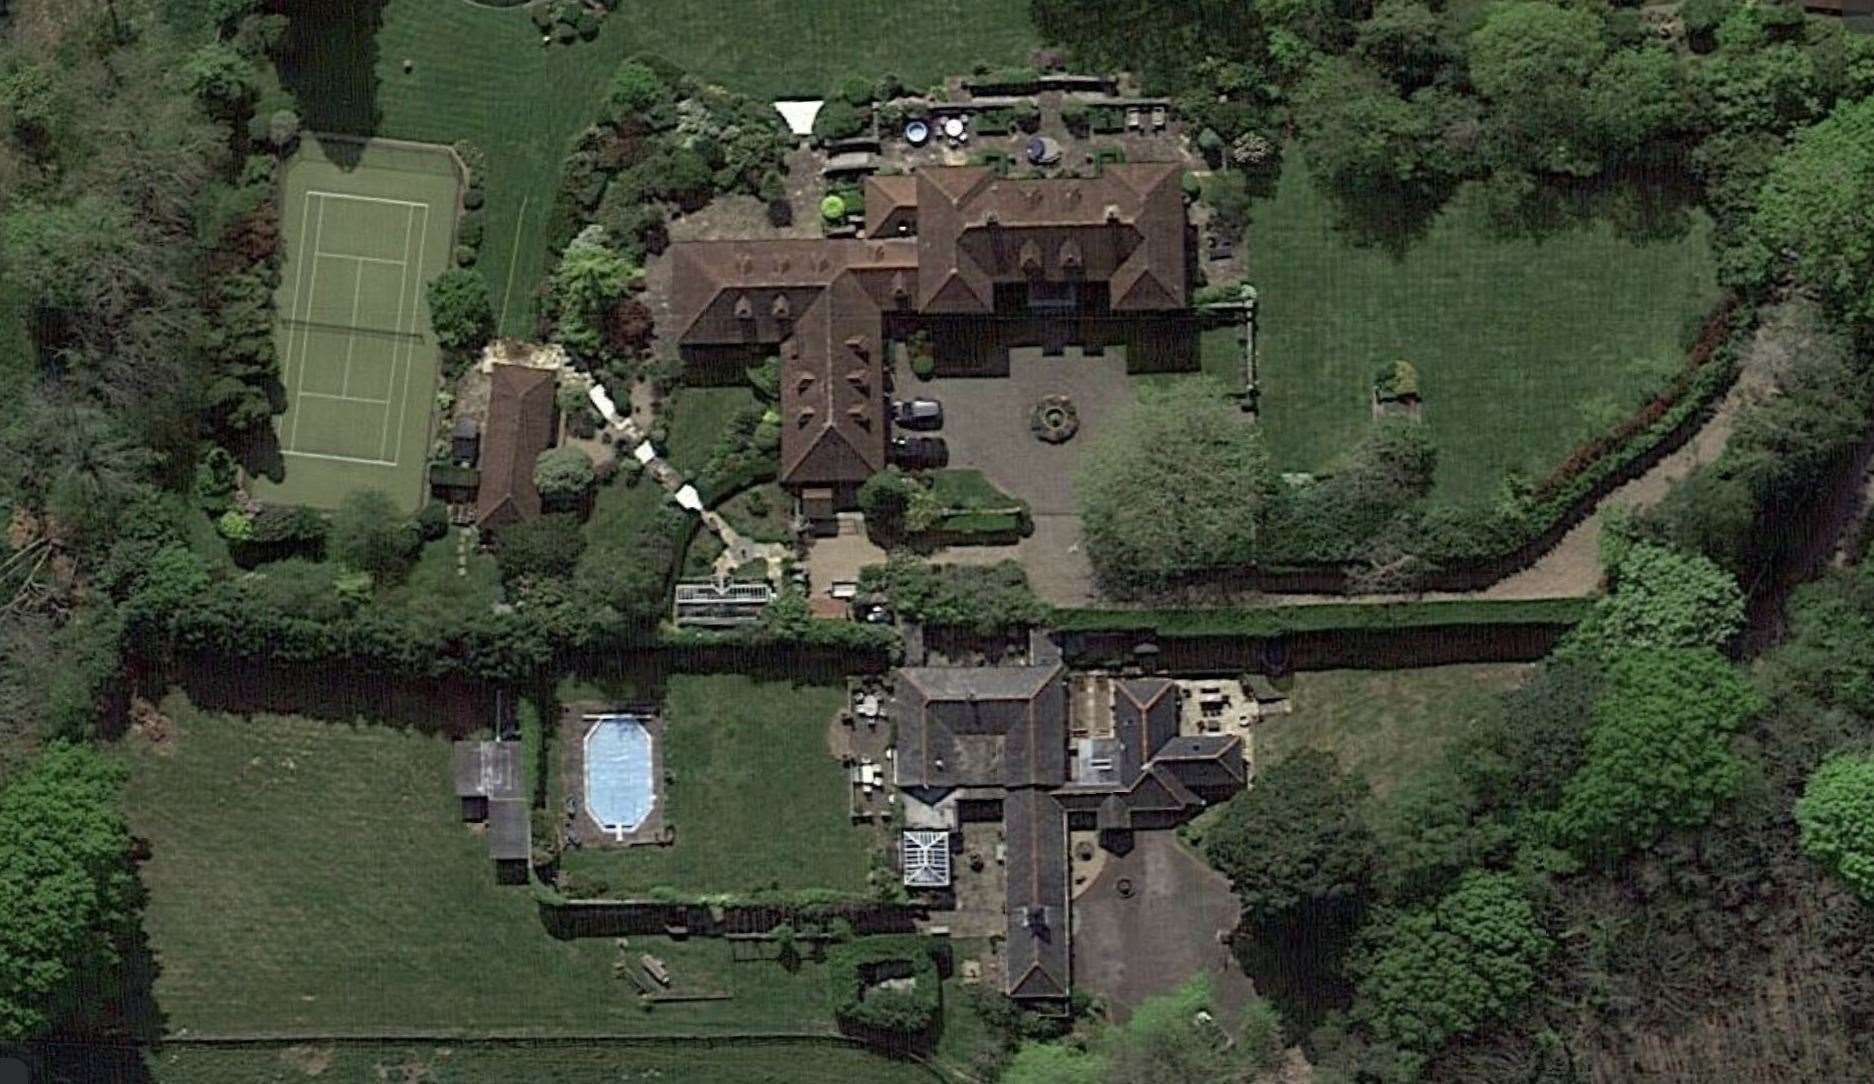 This Sandhurst mansion occupies a stunning seventeen-and-a-half acres, complete with tennis courts, a swimming pool, a rose garden, fruit trees and stabling for horses; not to mention a seven-bedroom house with spacious rooms of every kind. Photo: Google Earth